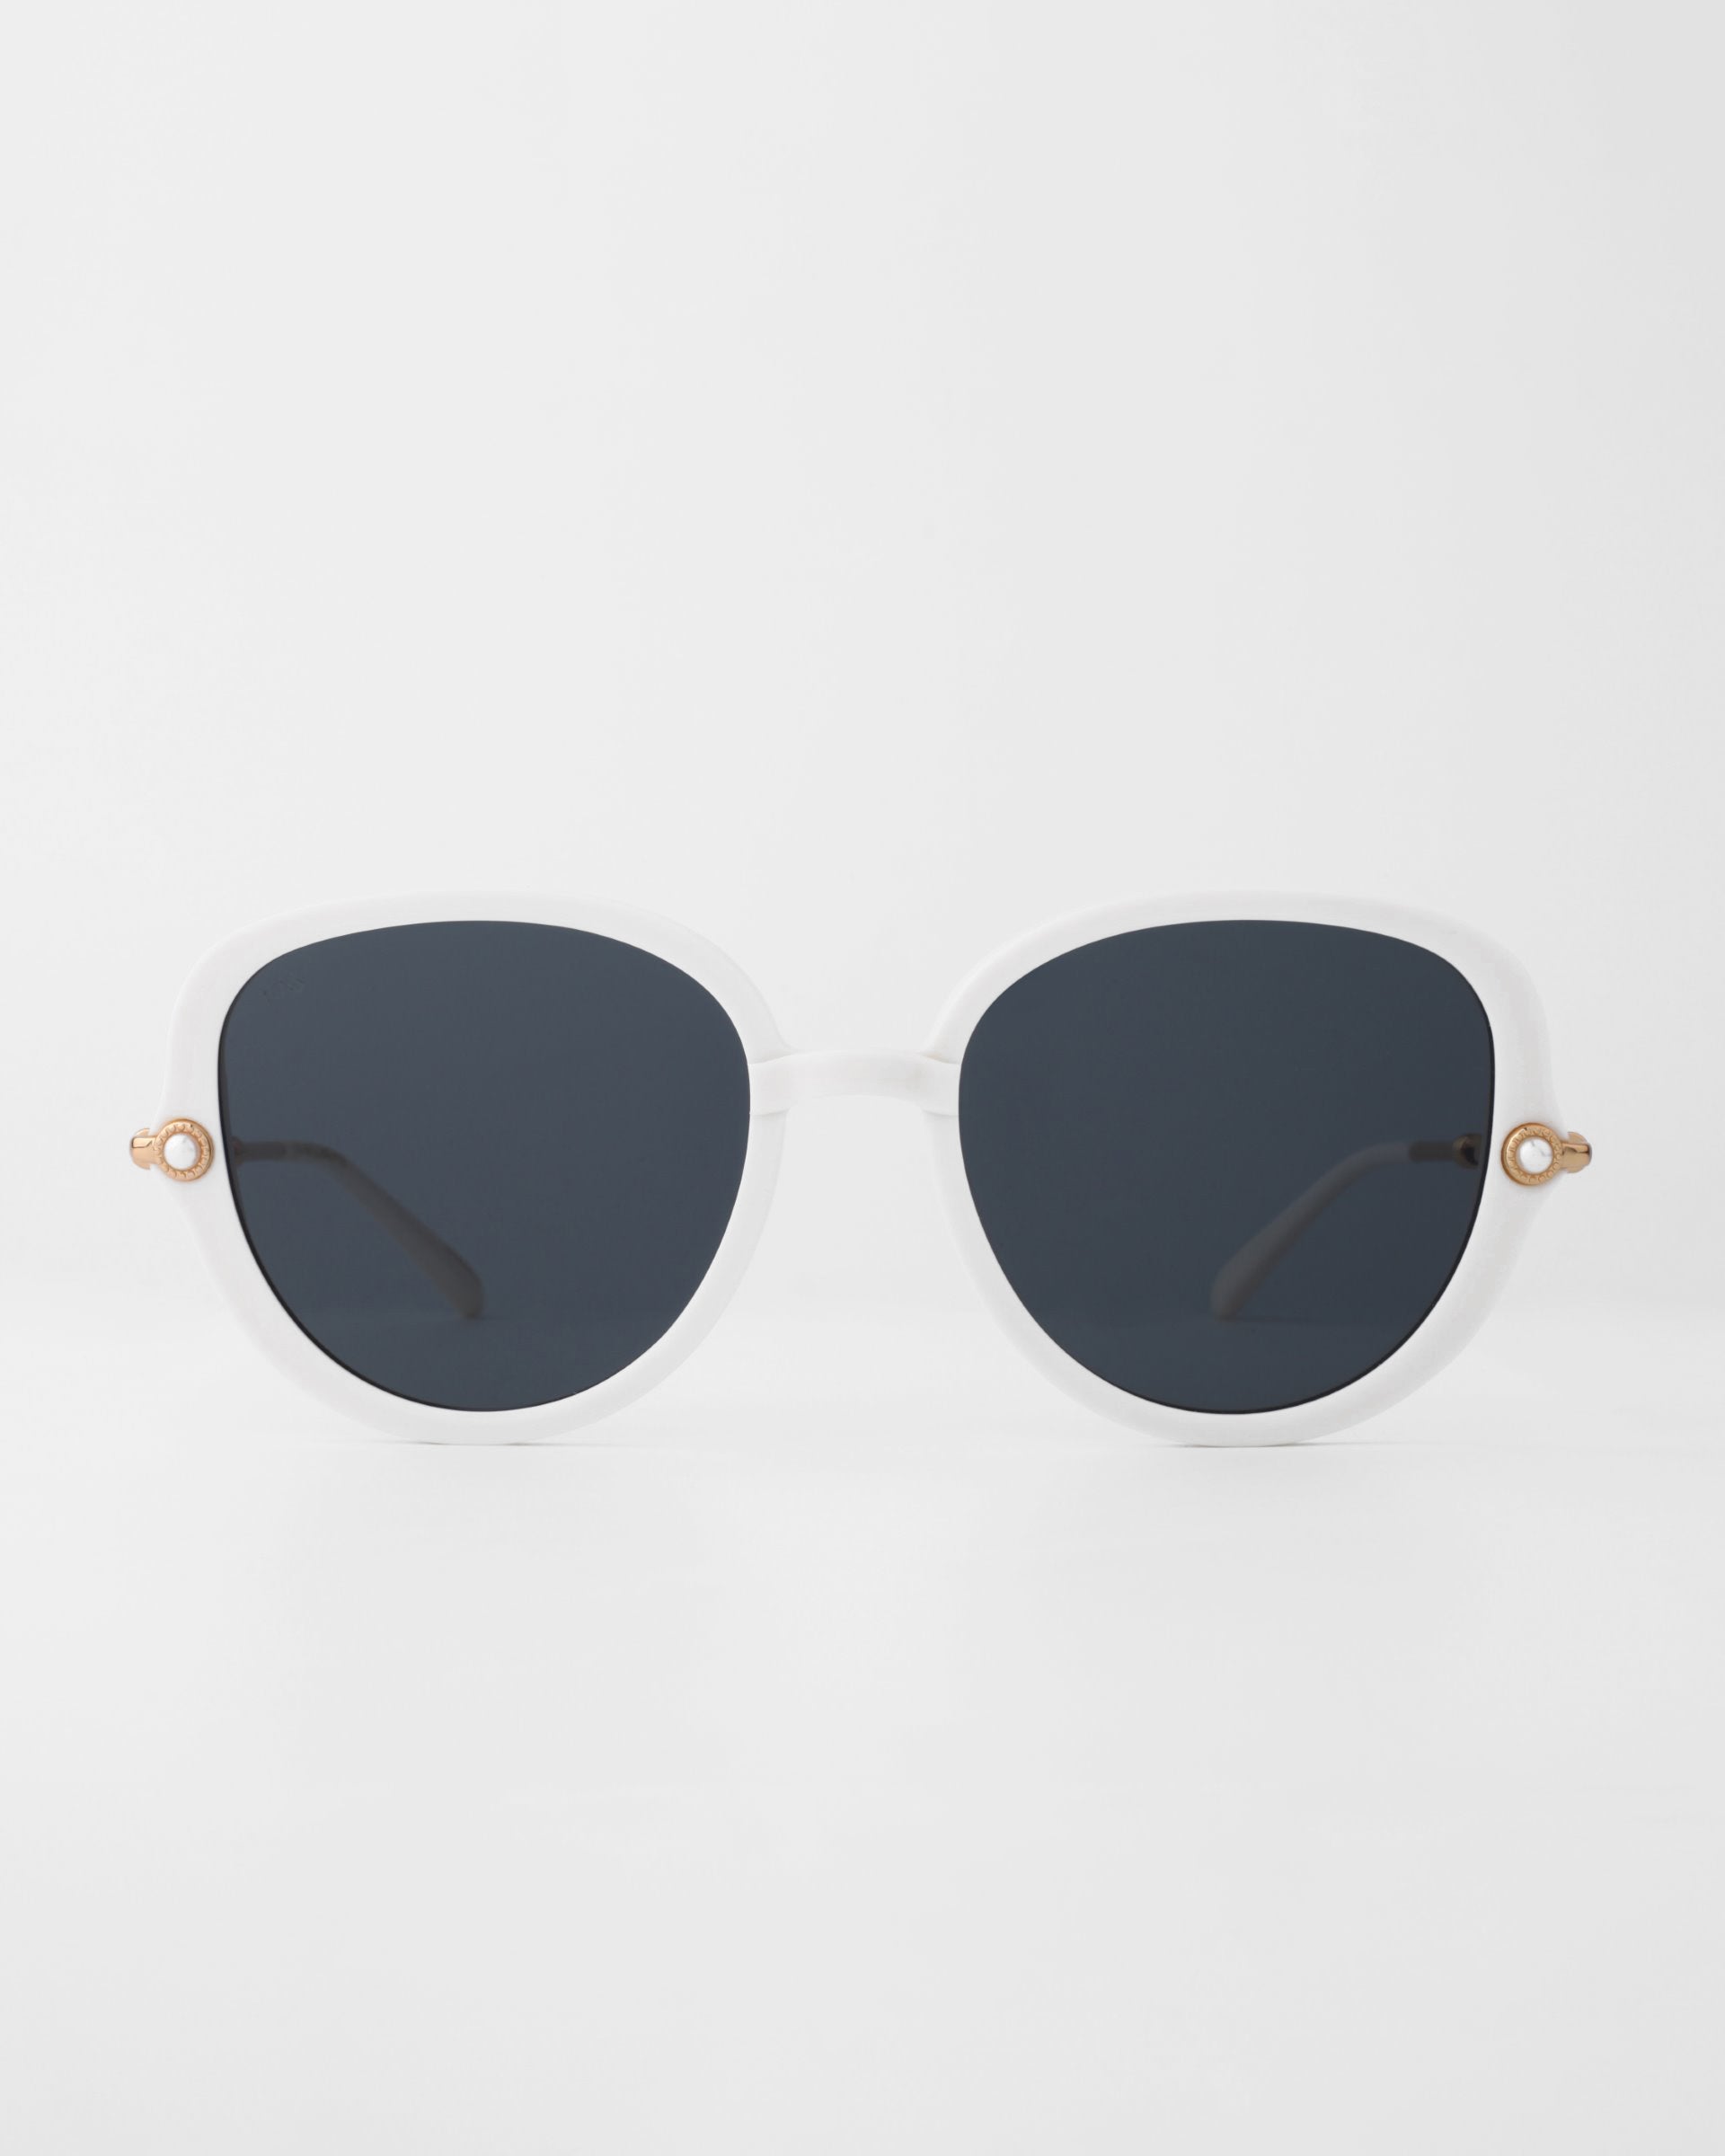 A pair of white-framed For Art's Sake® Primrose sunglasses with large, round dark lenses. Each temple is adorned with a small, handmade gold-plated decorative detail near the hinges. The glossy, smooth frame is made from plant-based acetate and the background is plain white.